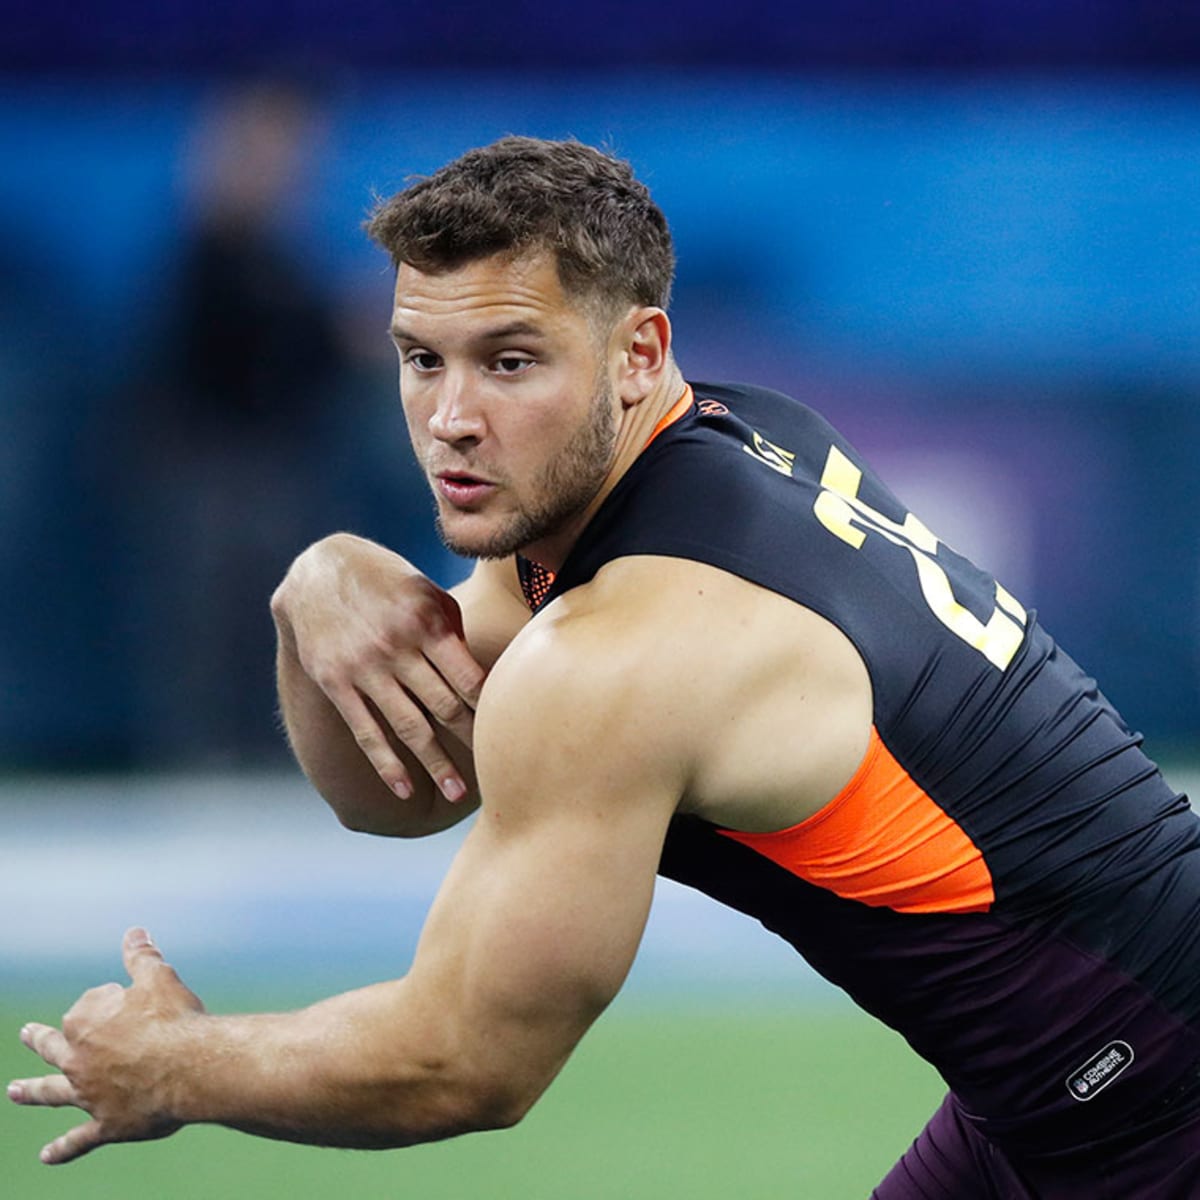 Nick Bosa: 2019 draft's consensus best player is ready to dominate